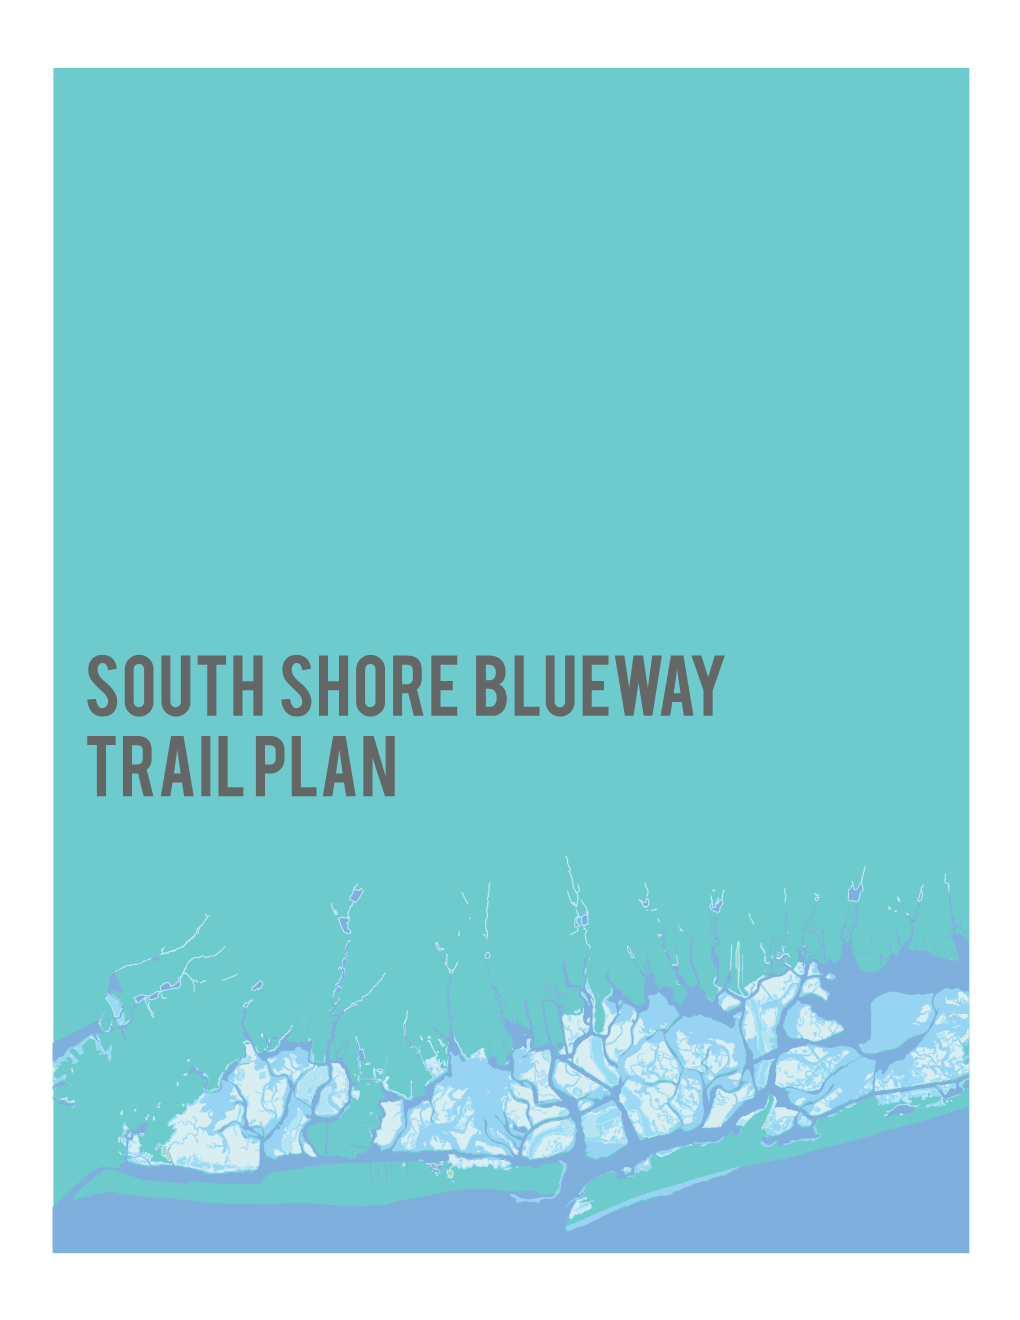 South Shore Blueway Trail Plan Recommends Several Options for Improving Public Access, While Advancing Safe Boating and Benefiting Local Economies